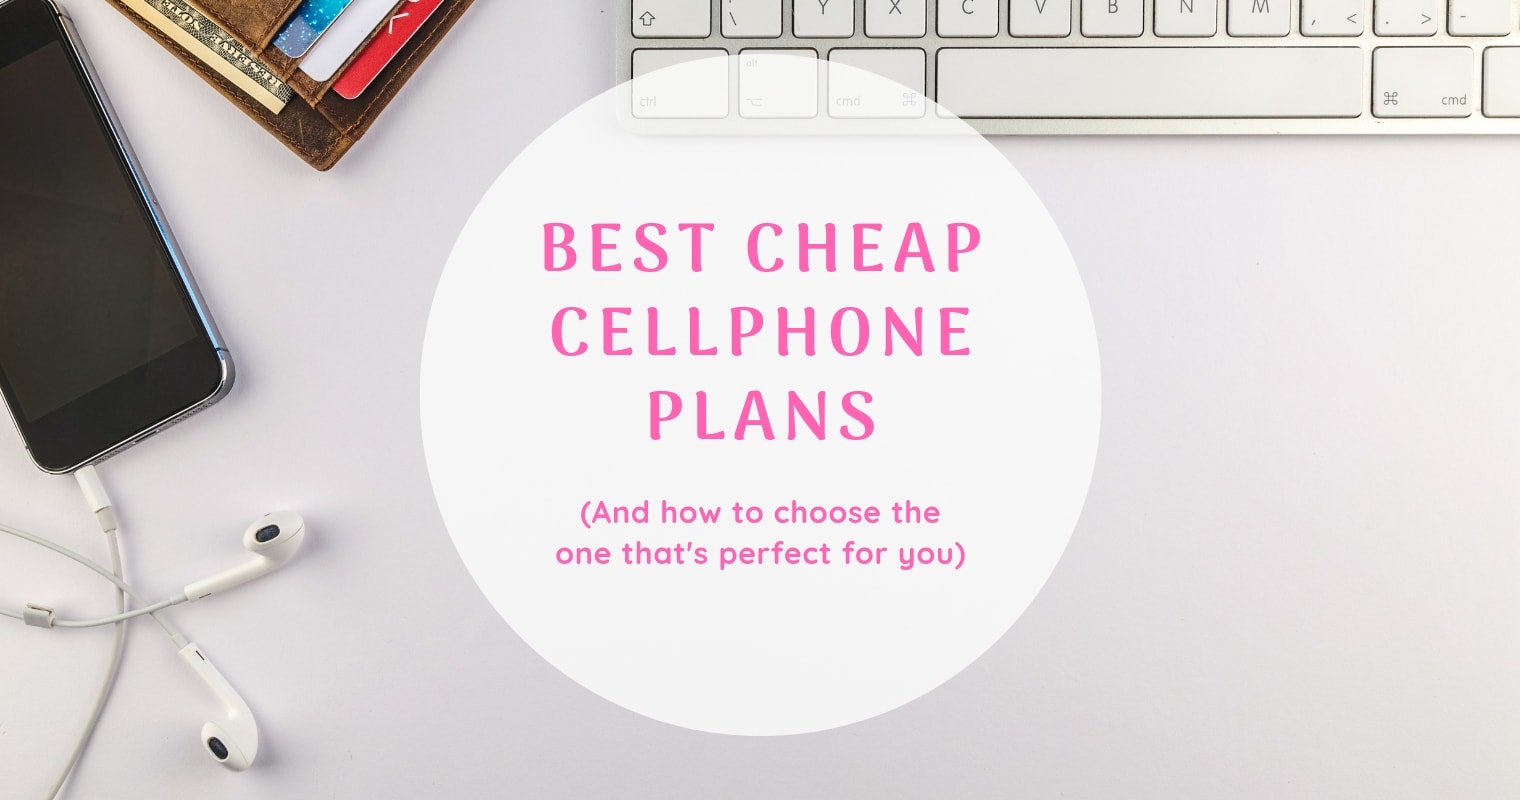 Looking to save money with a cheap cellphone plan? Look no further than this post that will give you the rundown and help you choose the plan that's right for you.